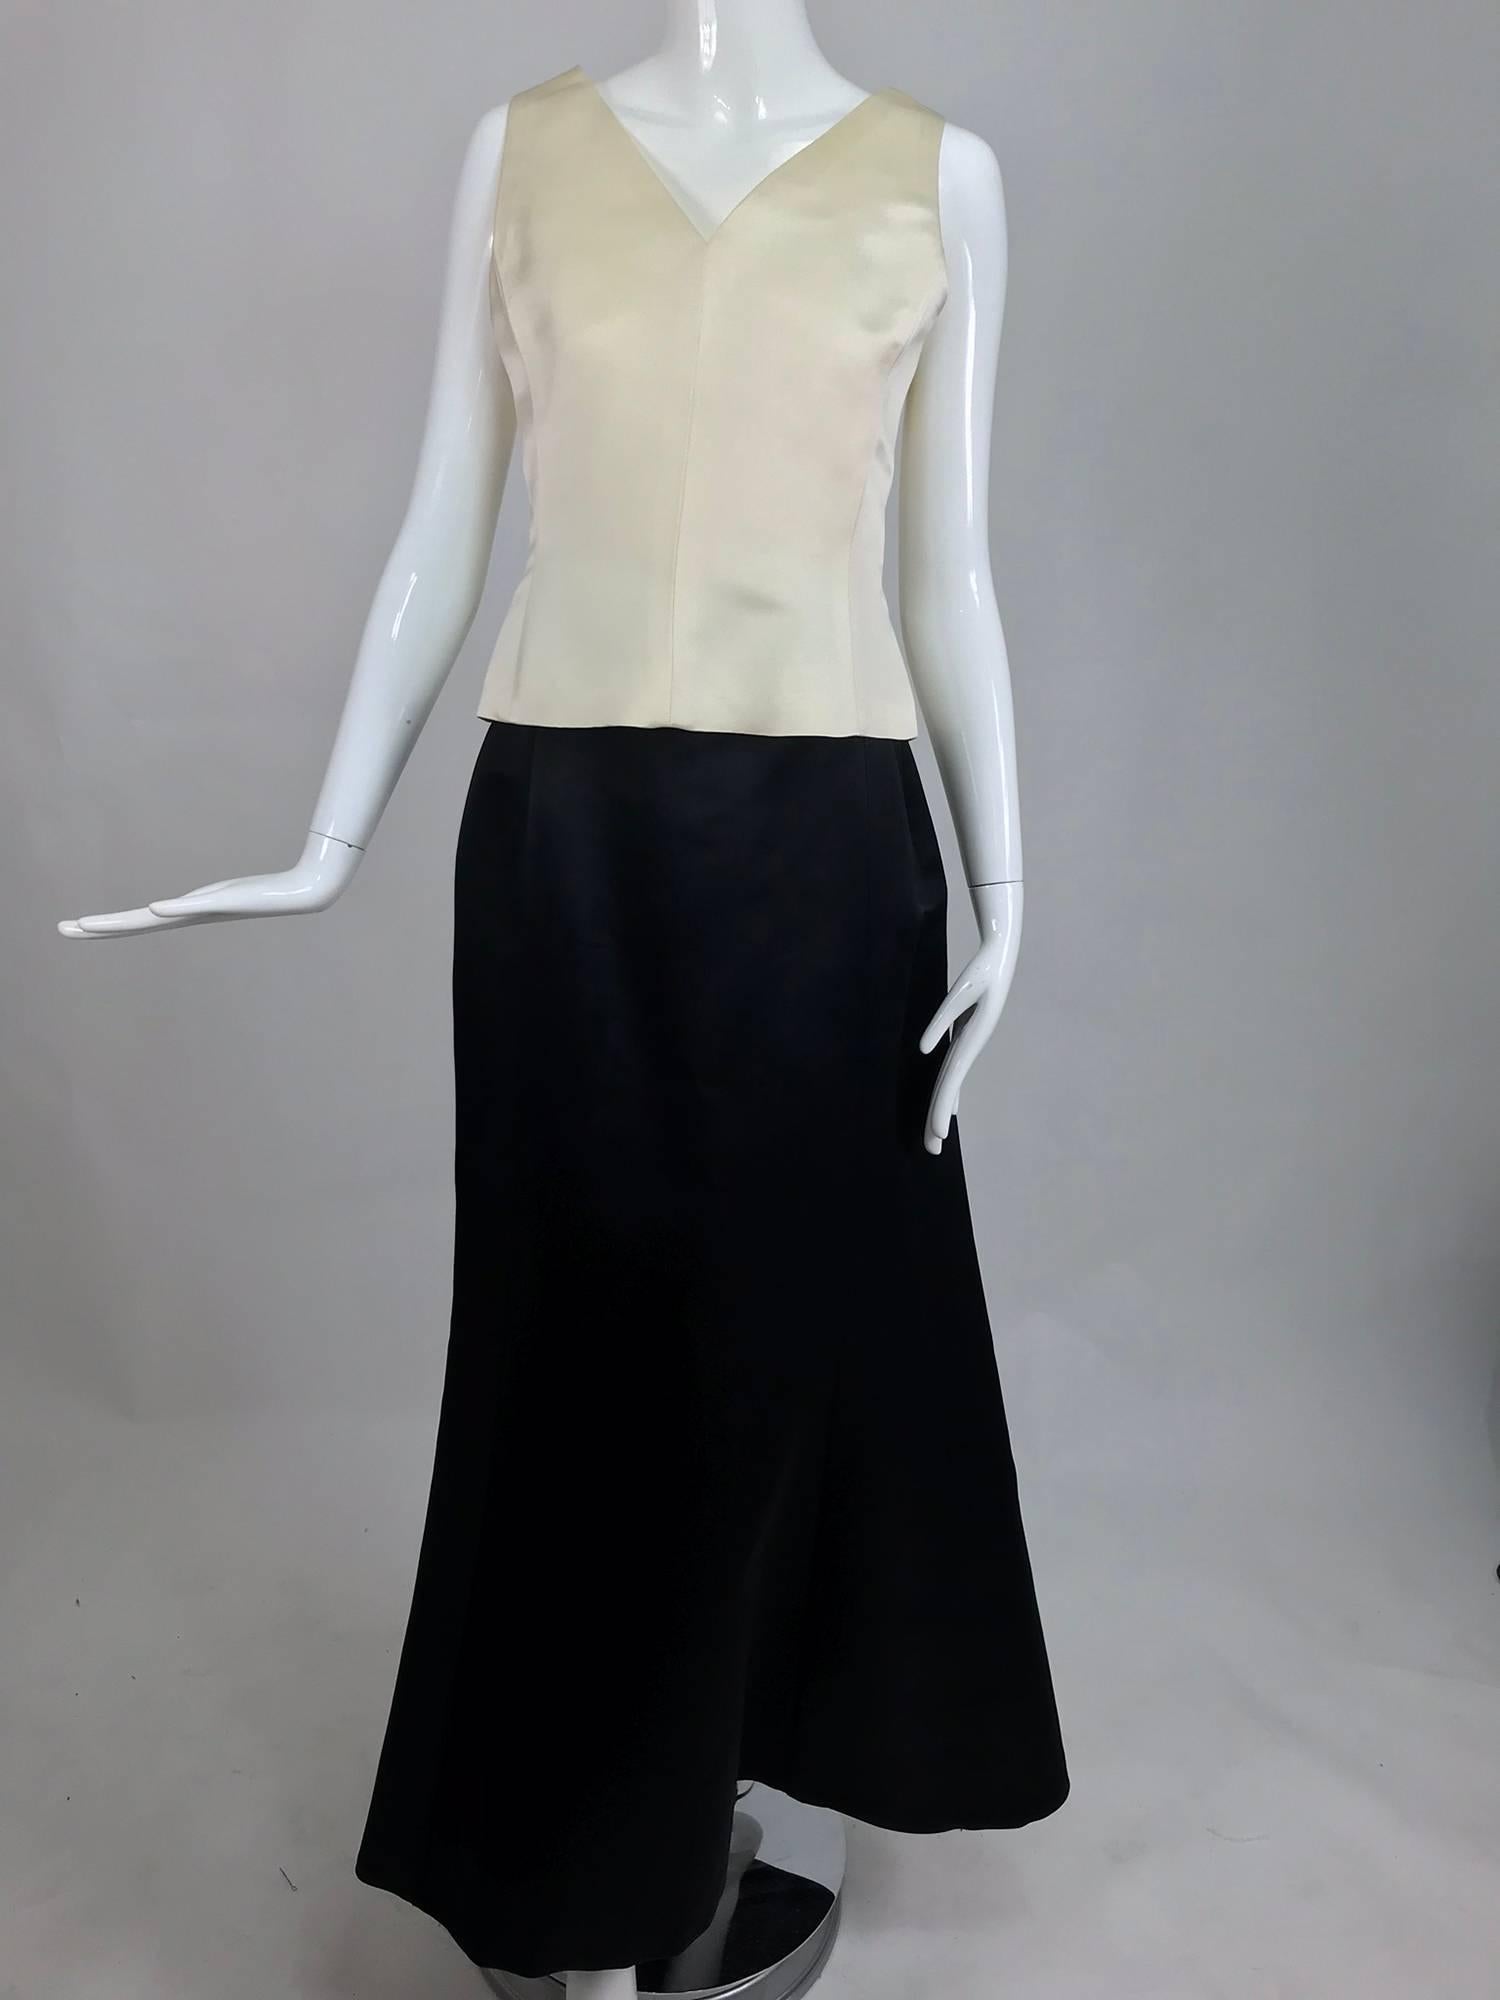 Vintage Bill Blass evening top and skirt set in cream and black silk satin 1980s For Sale 3